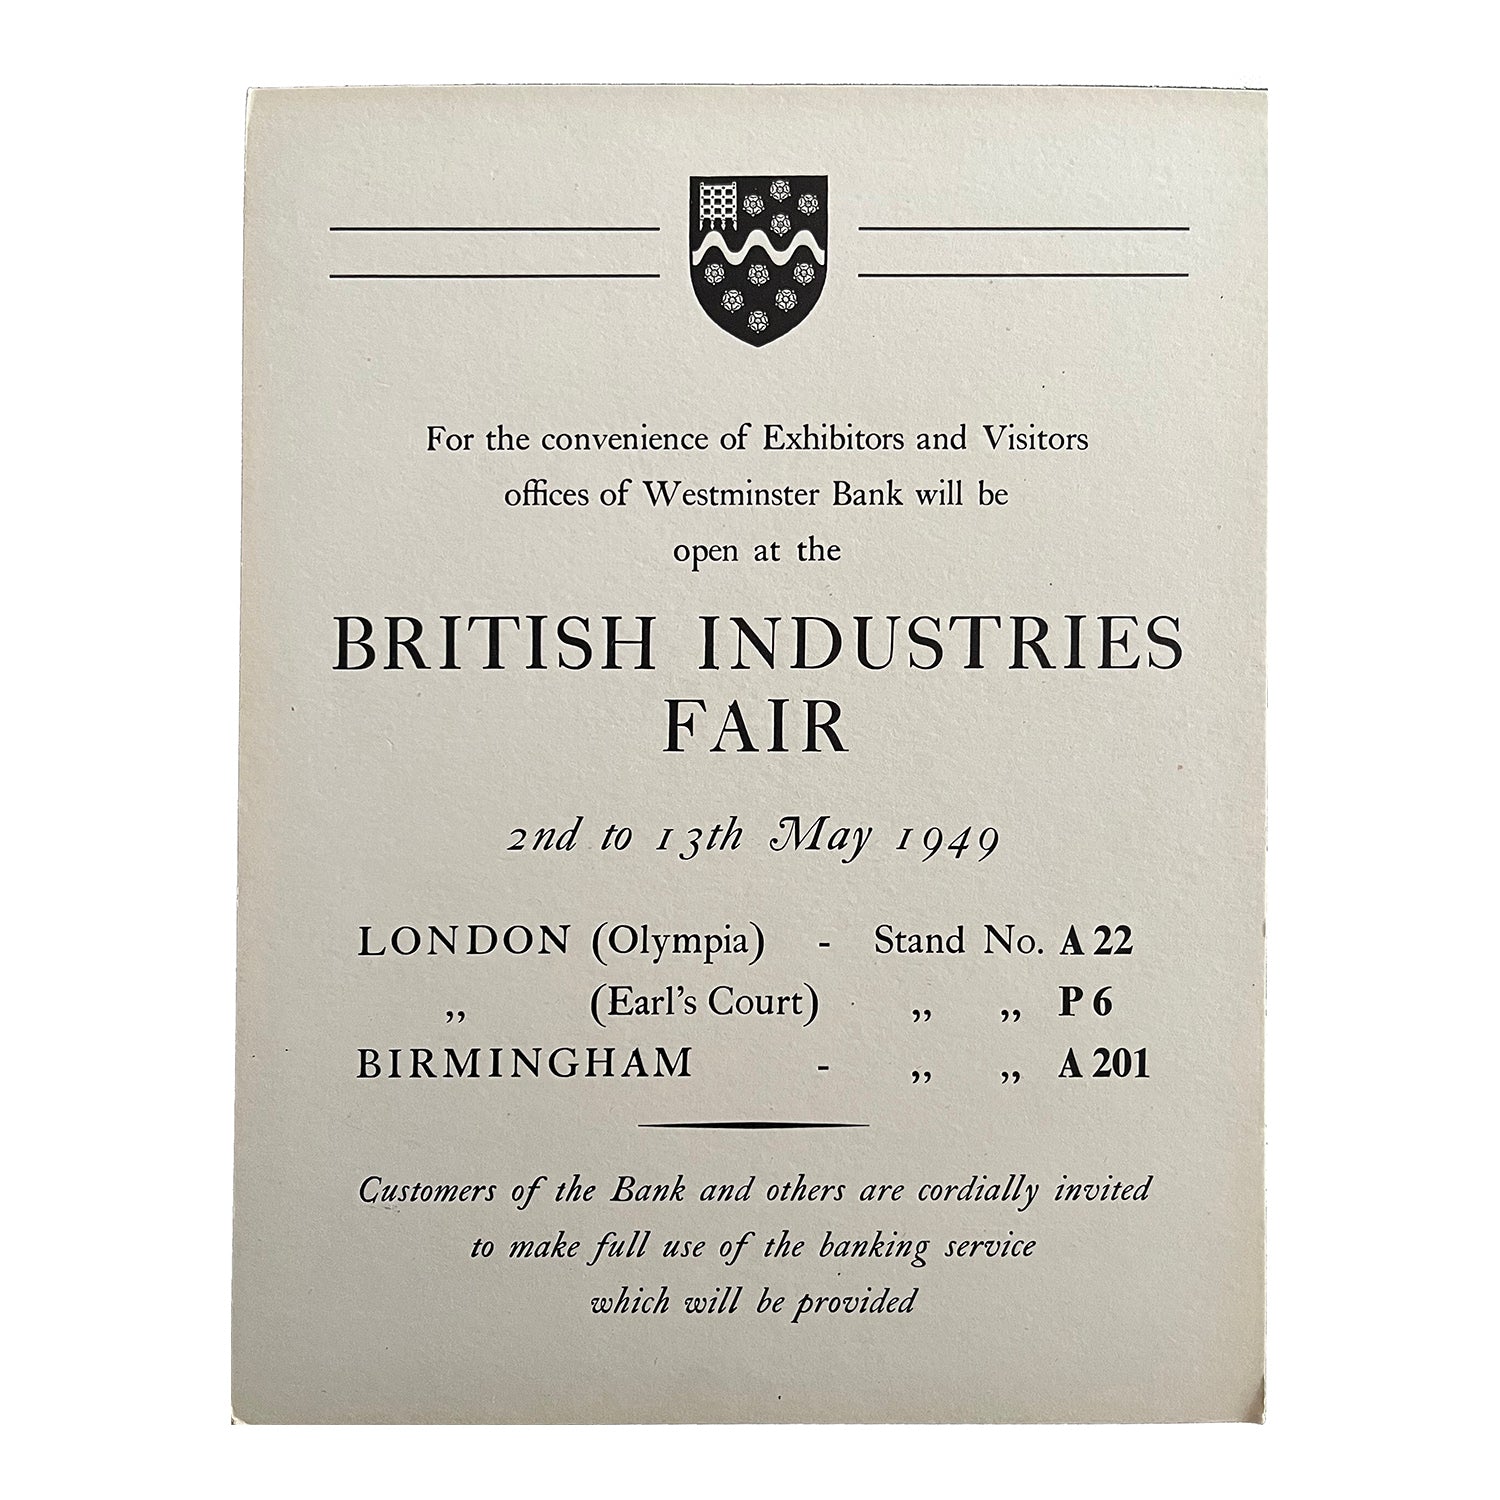 hanging card exhibitor notice published by the Westminster Bank for display at the British Industries Fair, 1949